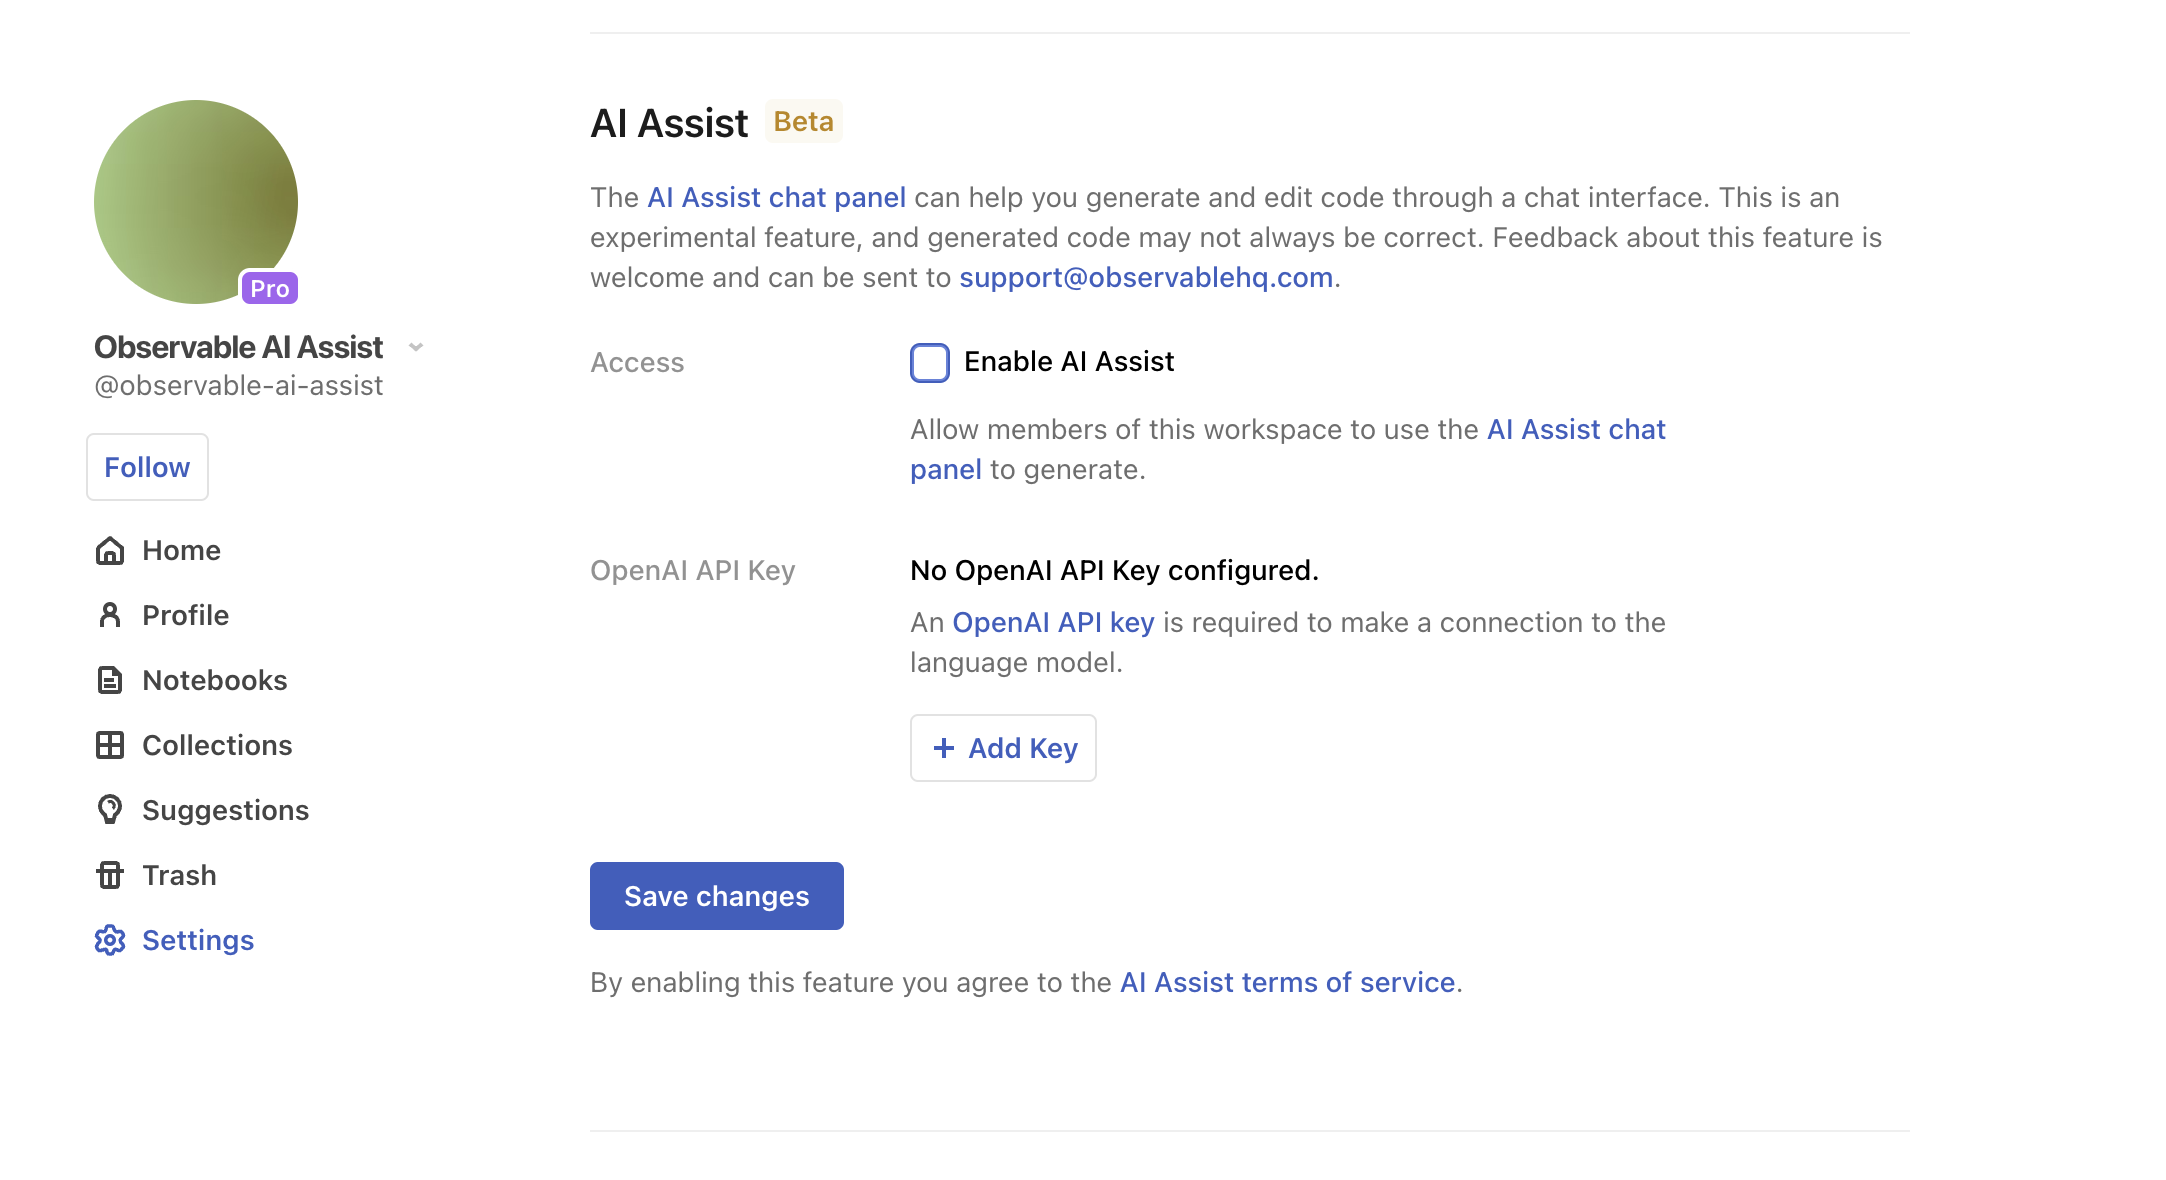 A screenshot of the Settings page scrolled down to the AI Assist section and showing the configuration options available there.